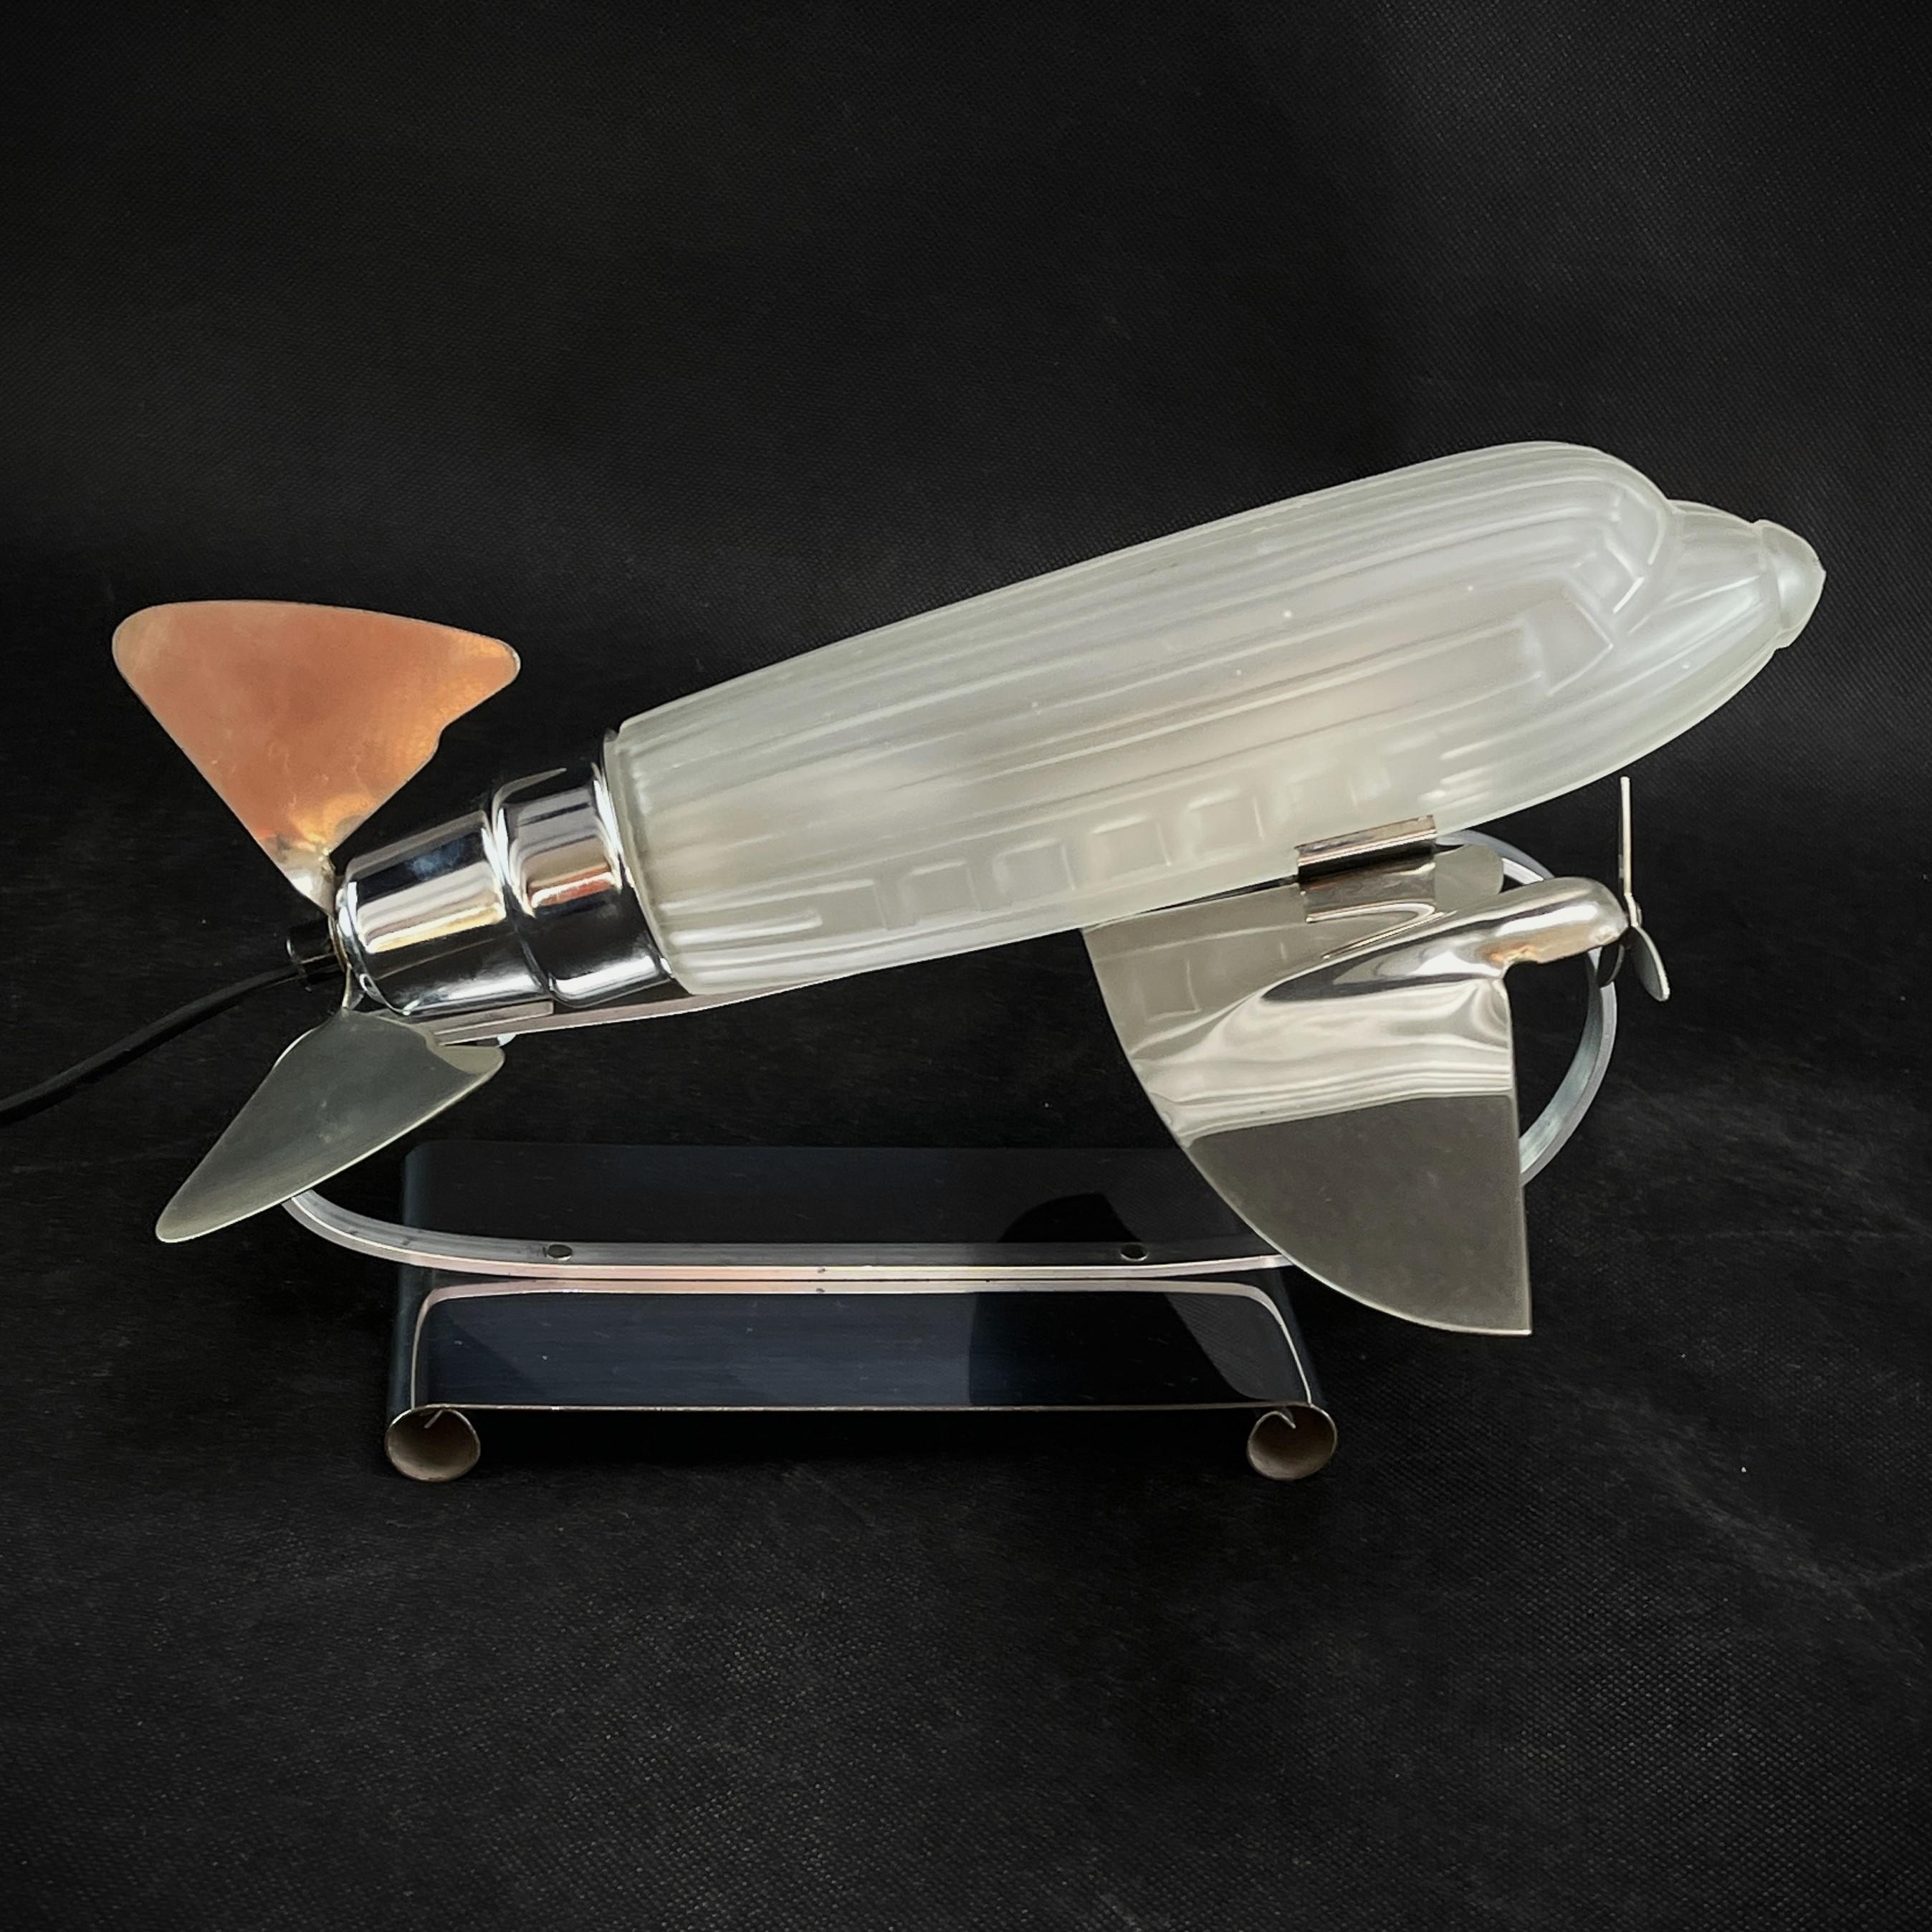 Dakota DC3 Airplane Table lamp by Sarsaparilla

The Airplane Lamp by Sarsaparilla Deco Designs is an exquisite work of art in Art Deco style, designed in 1978. The choice of the Dakota DC3 as a source of inspiration gives this lamp a nostalgic touch